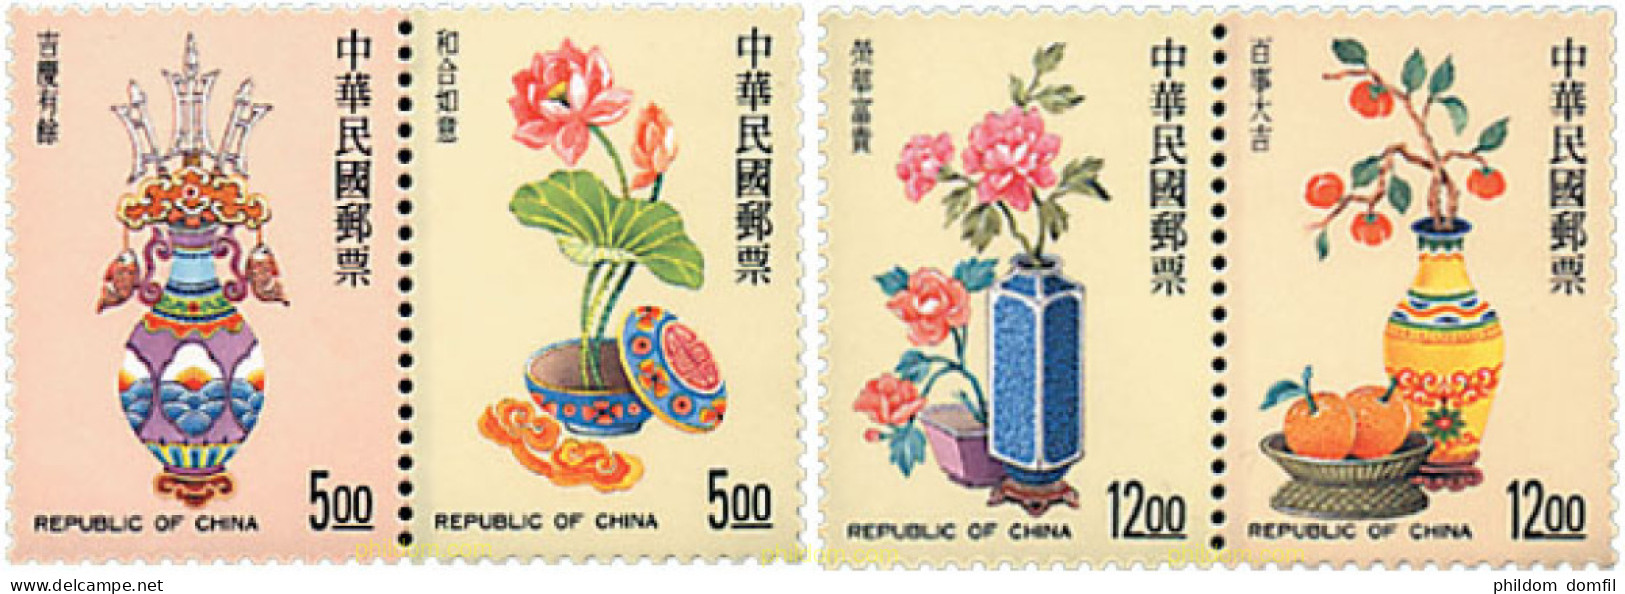 4908 MNH CHINA. FORMOSA-TAIWAN 1998 ARREGLOS FLORALES - Unused Stamps